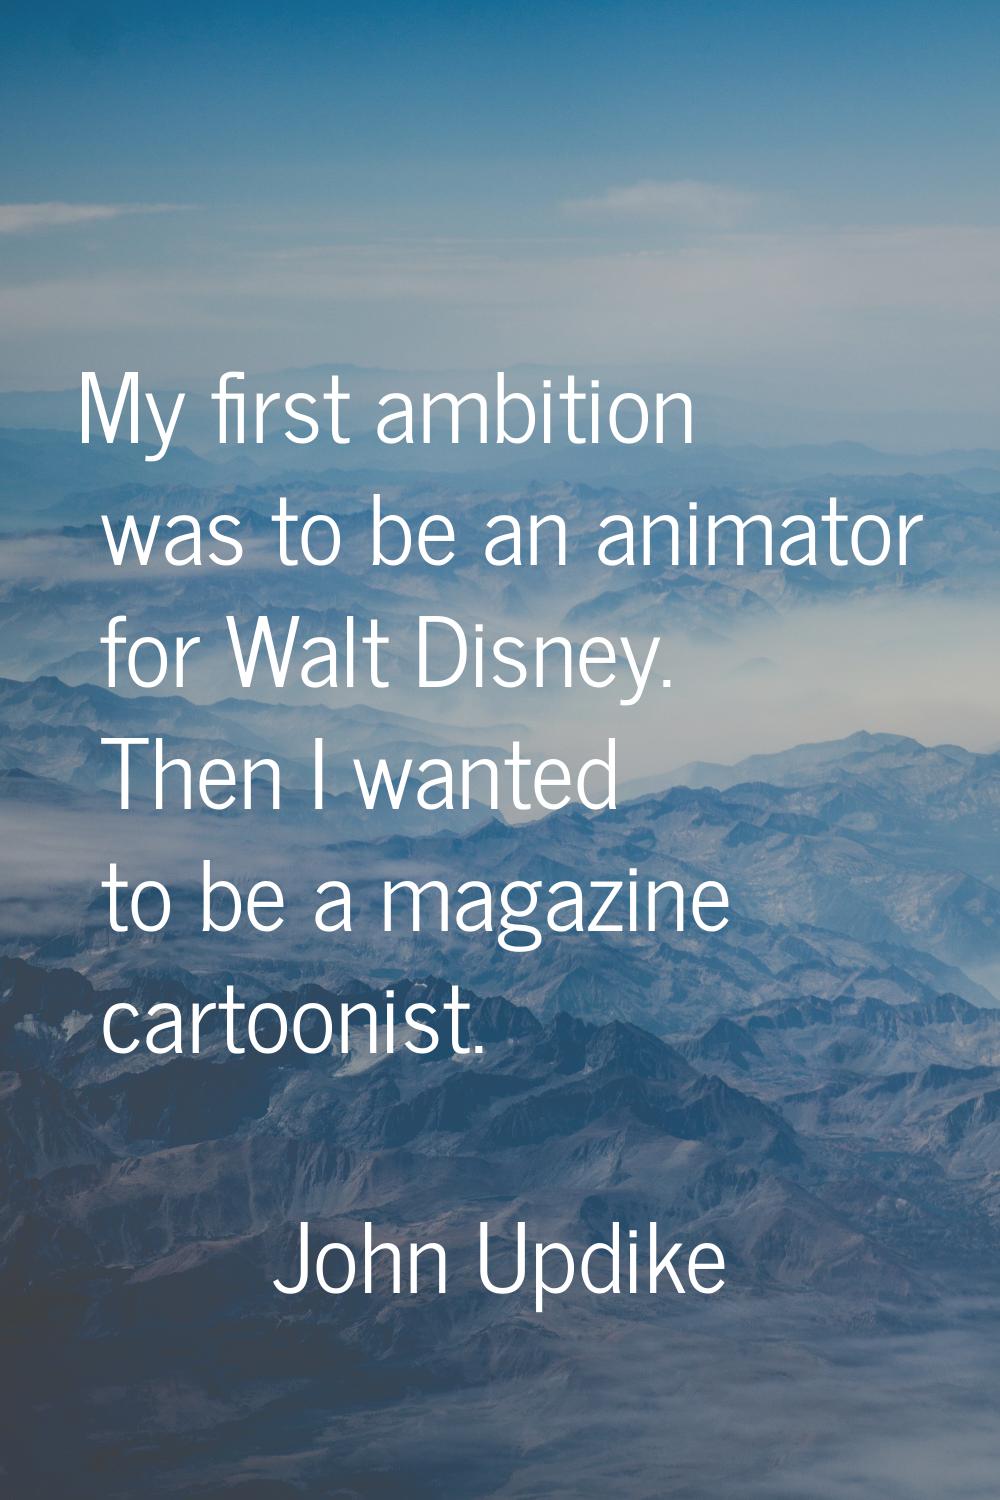 My first ambition was to be an animator for Walt Disney. Then I wanted to be a magazine cartoonist.